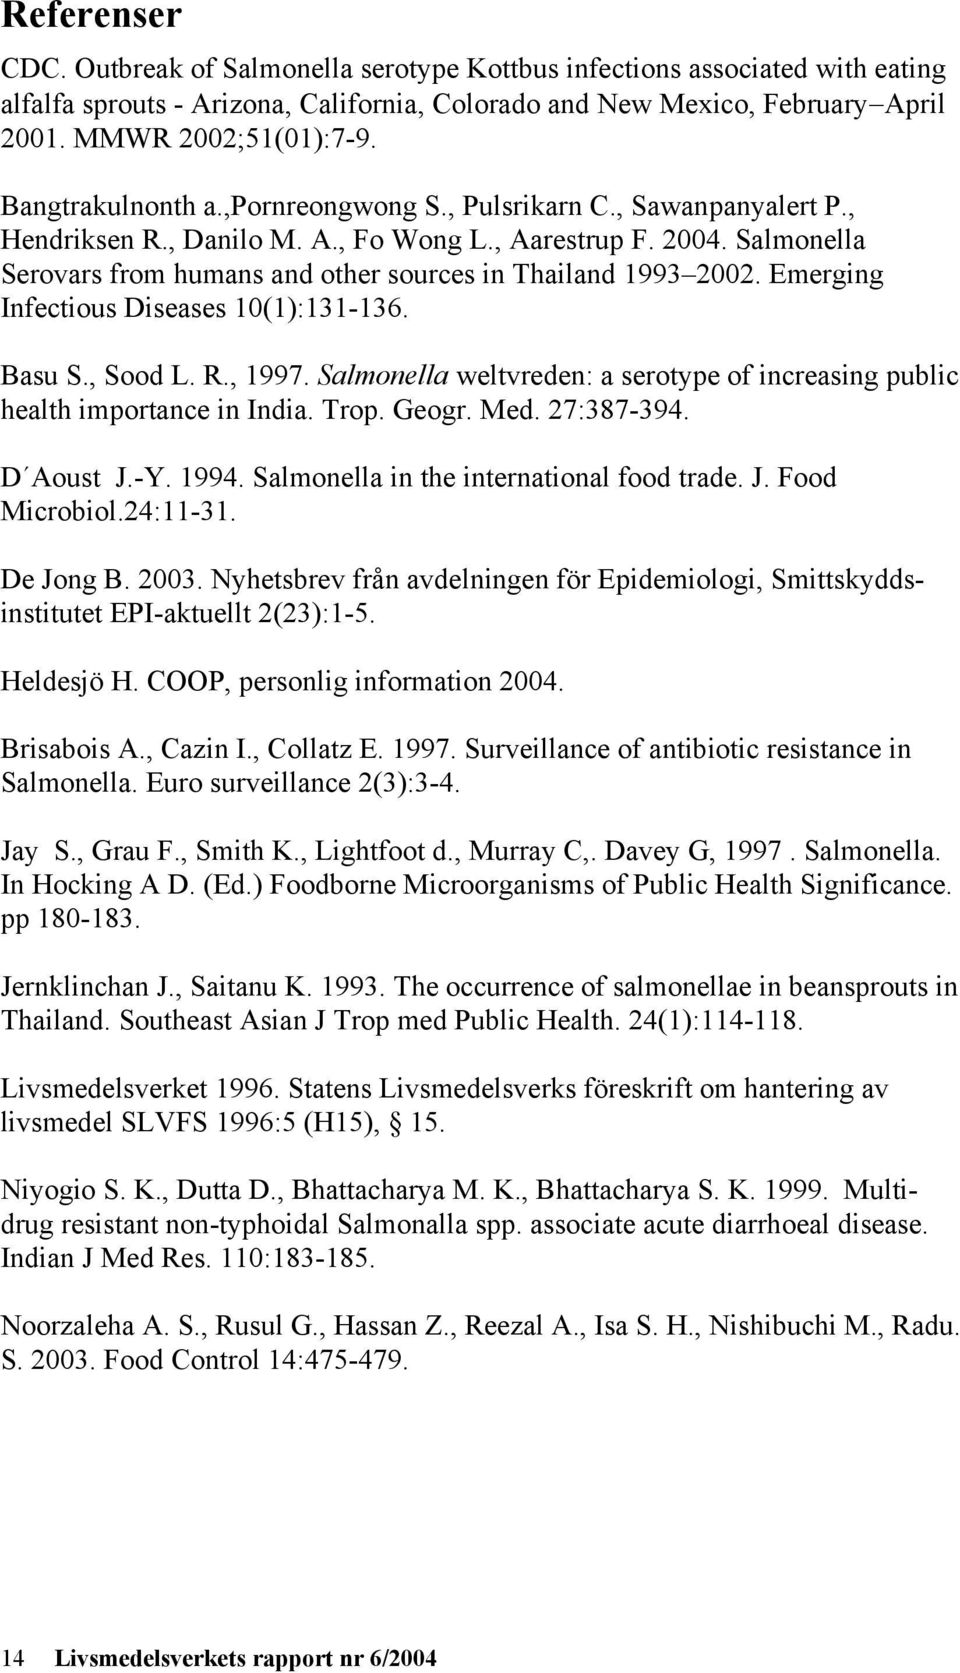 Salmonella Serovars from humans and other sources in Thailand 1993 2002. Emerging Infectious Diseases 10(1):131-136. Basu S., Sood L. R., 1997.